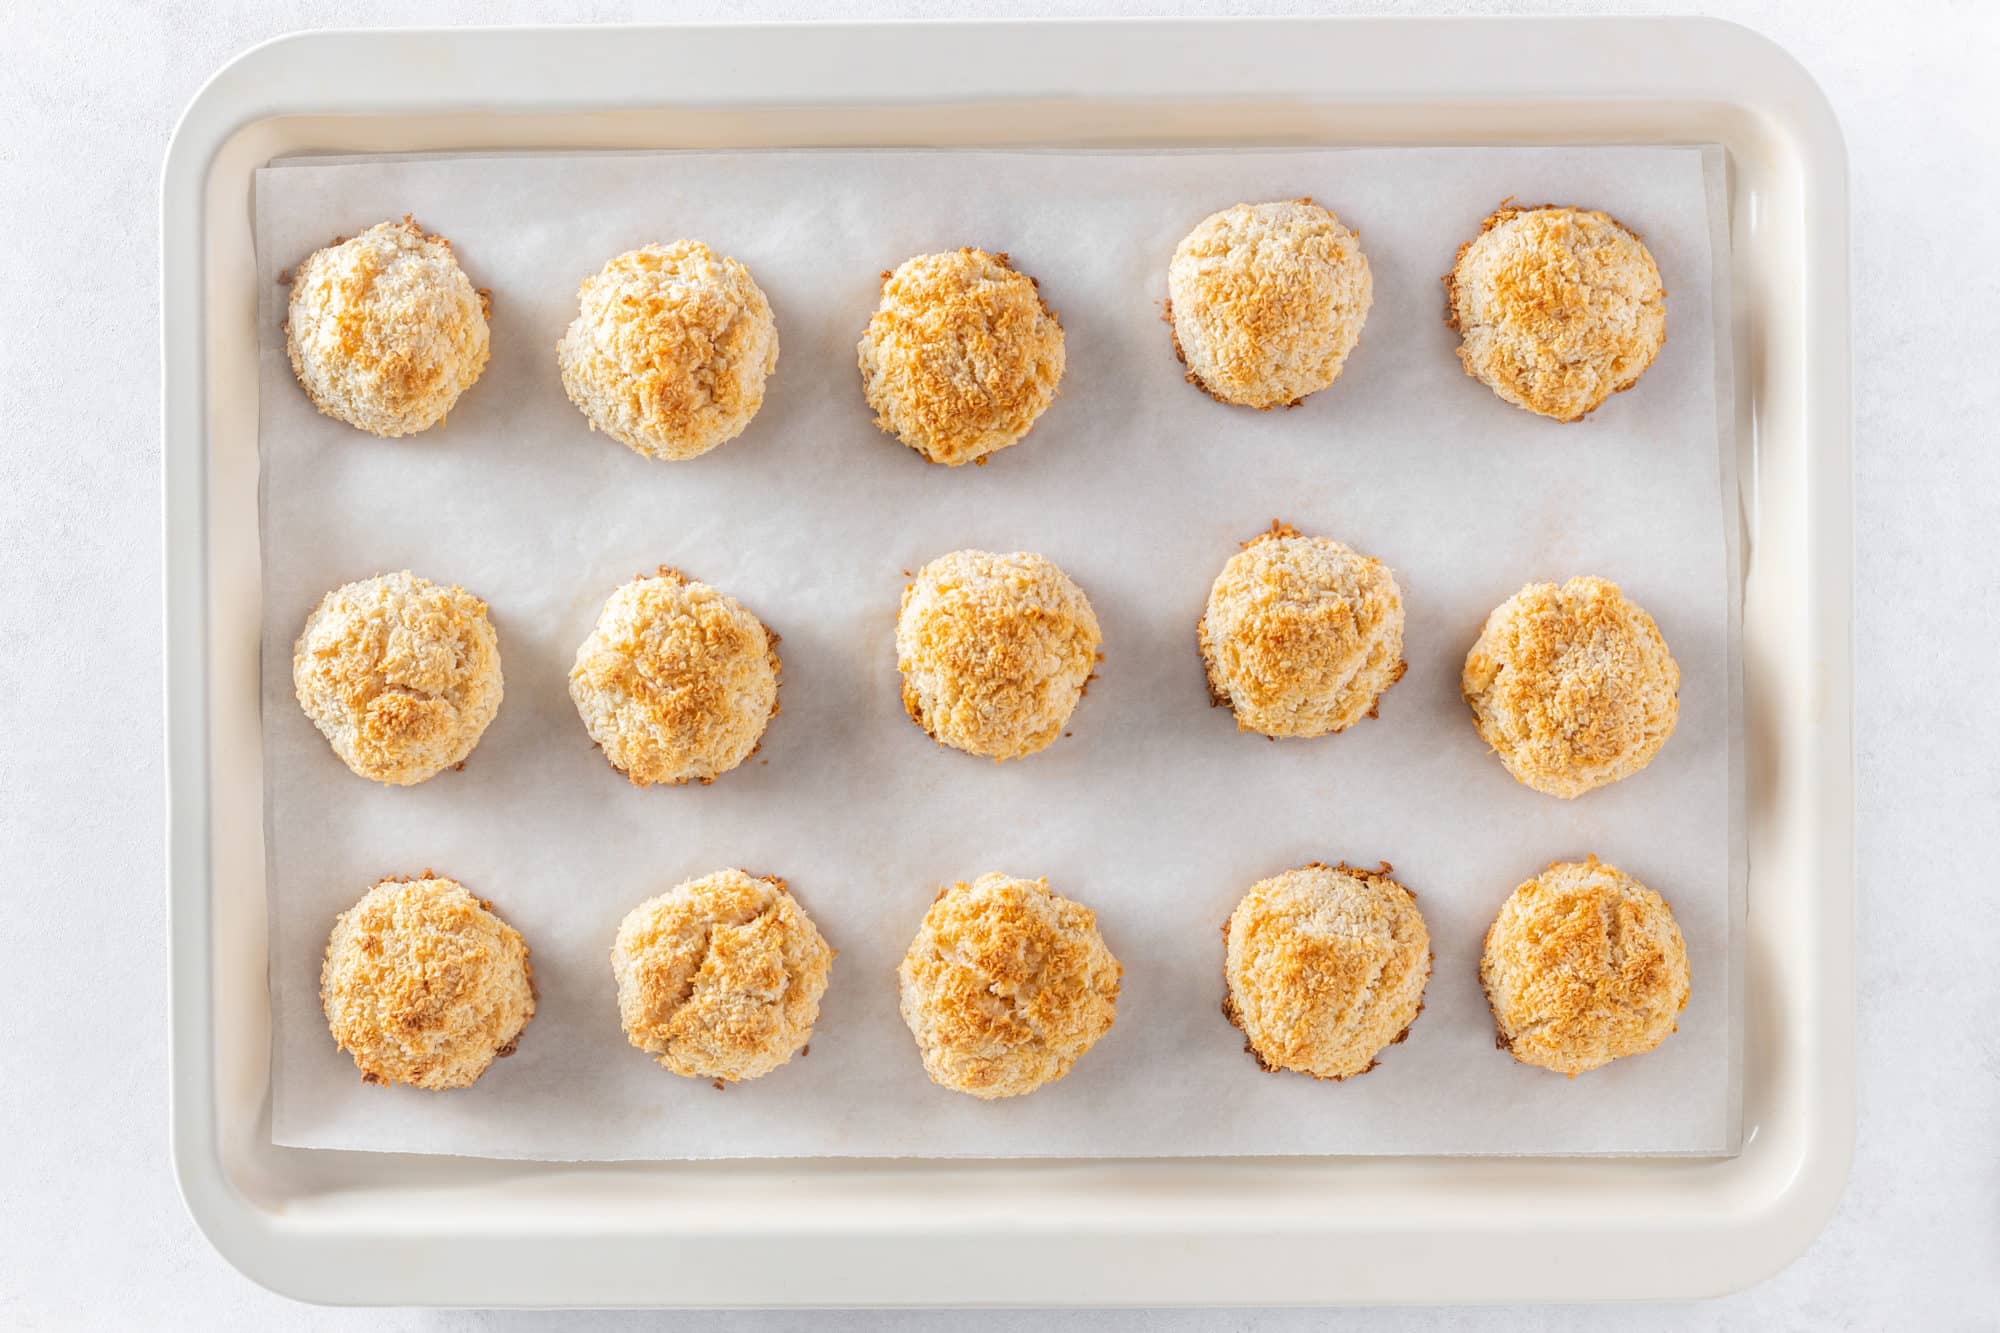 Coconut macaroons baked on parchment paper and a baking tray.